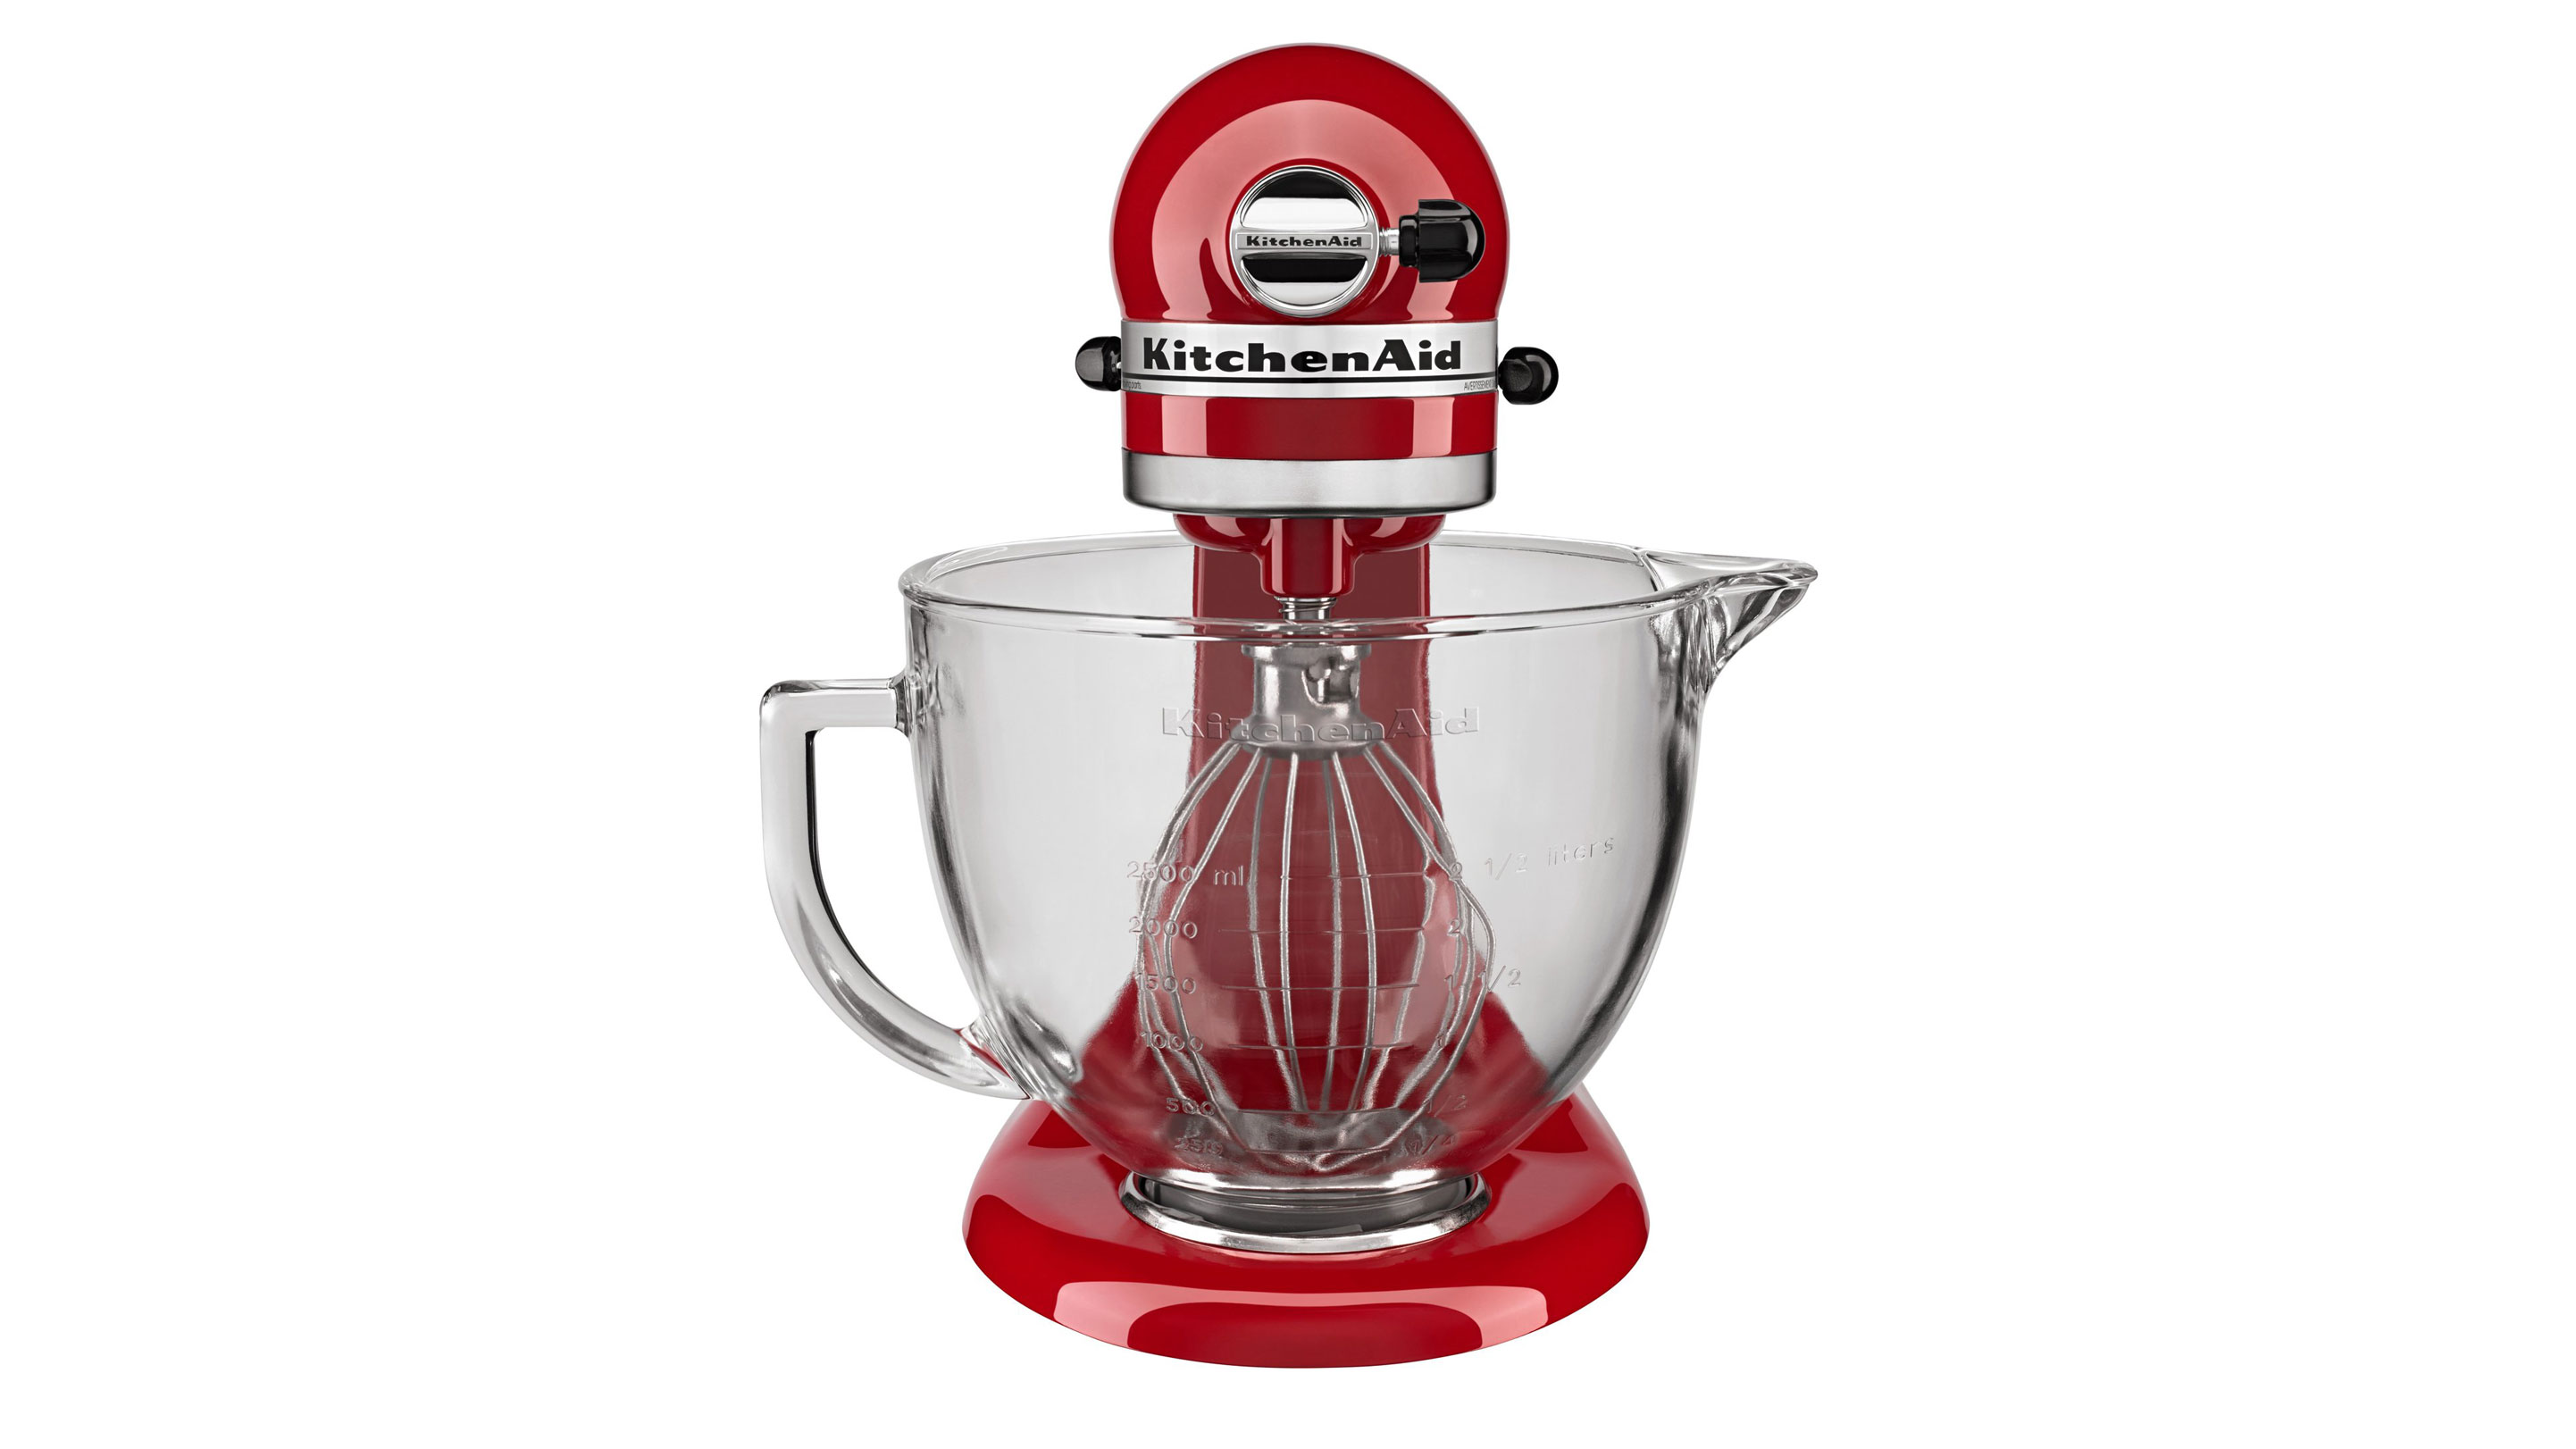 Kitchenaid stand mixer in red